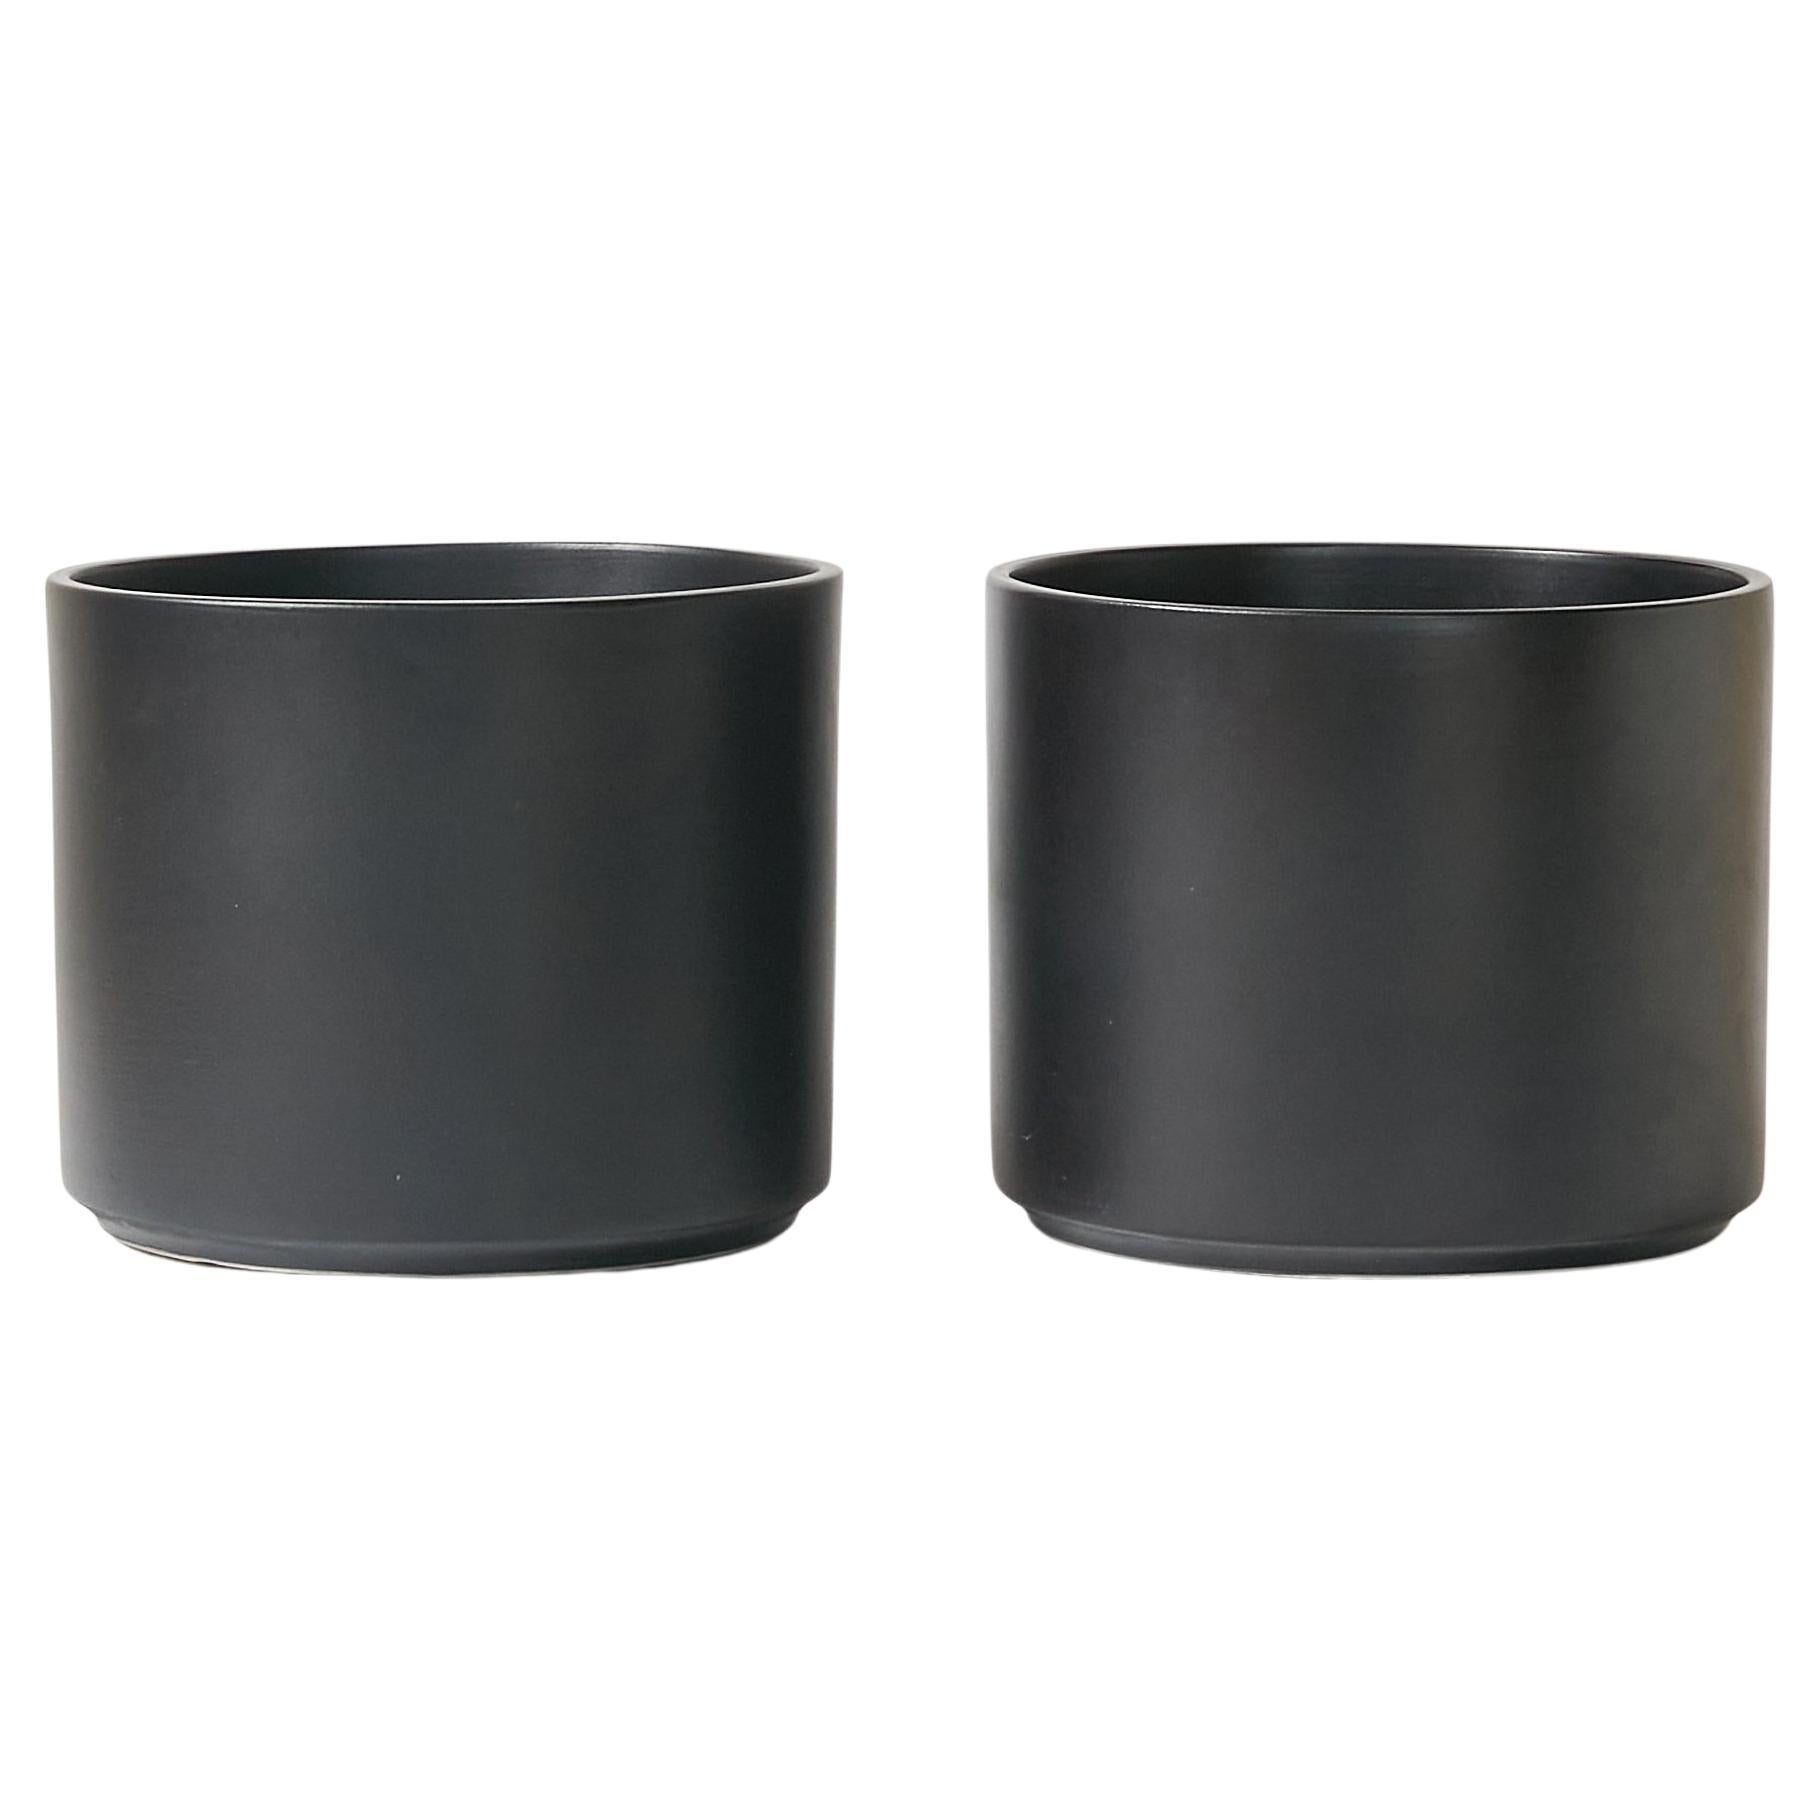 Pair of Gainey Planters in Satin Black Glaze, California Architectural Pottery